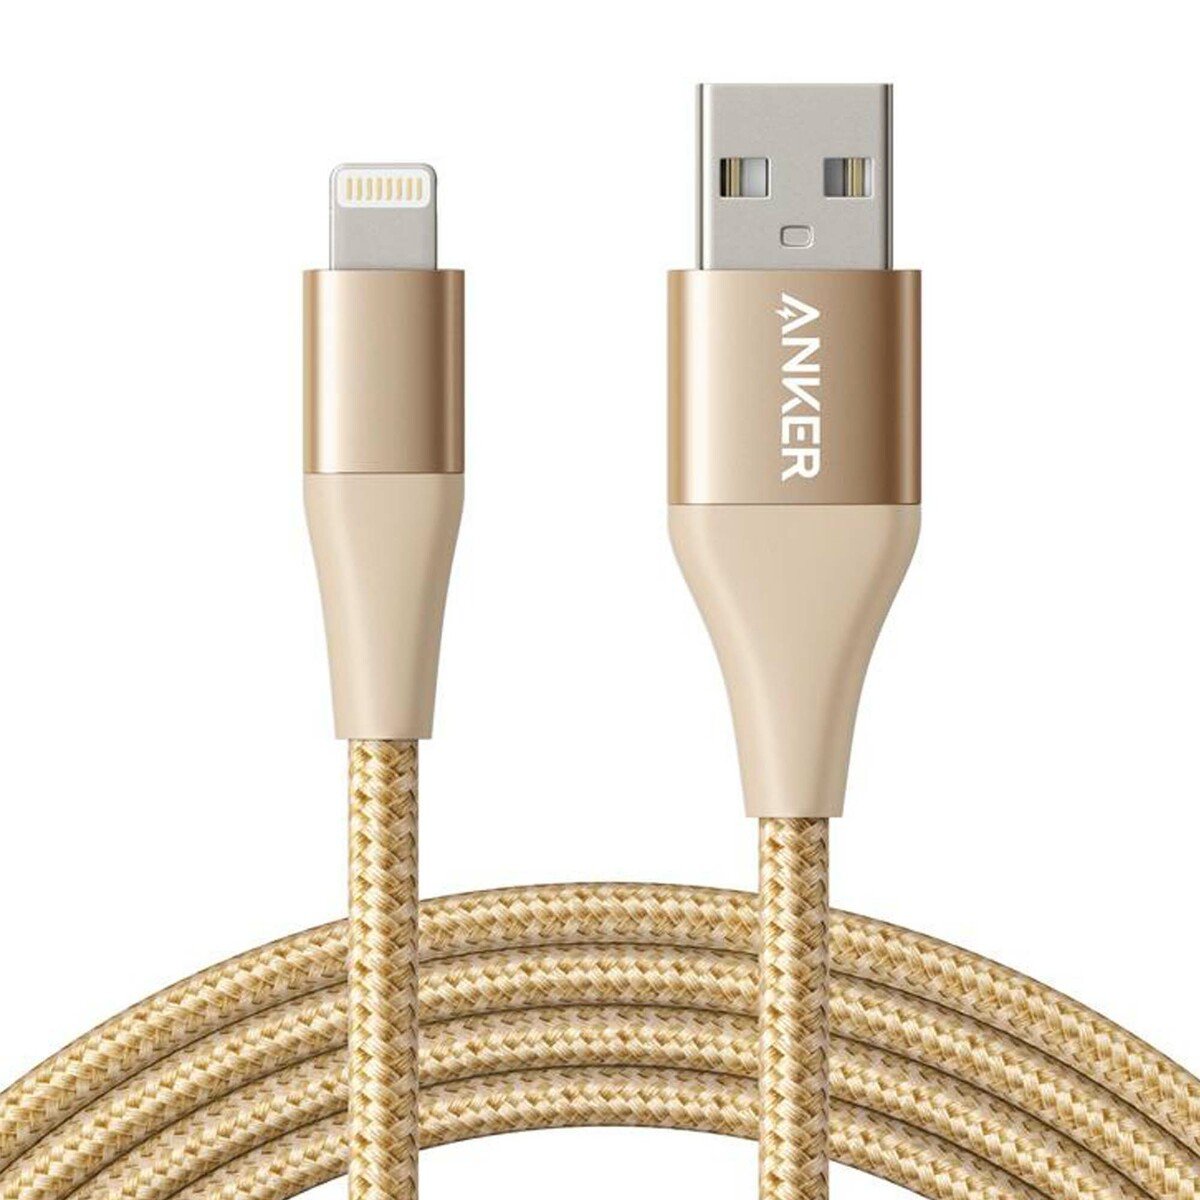 Anker PowerLine+II Lightning Cable A8453HB1 6 Feet Gold